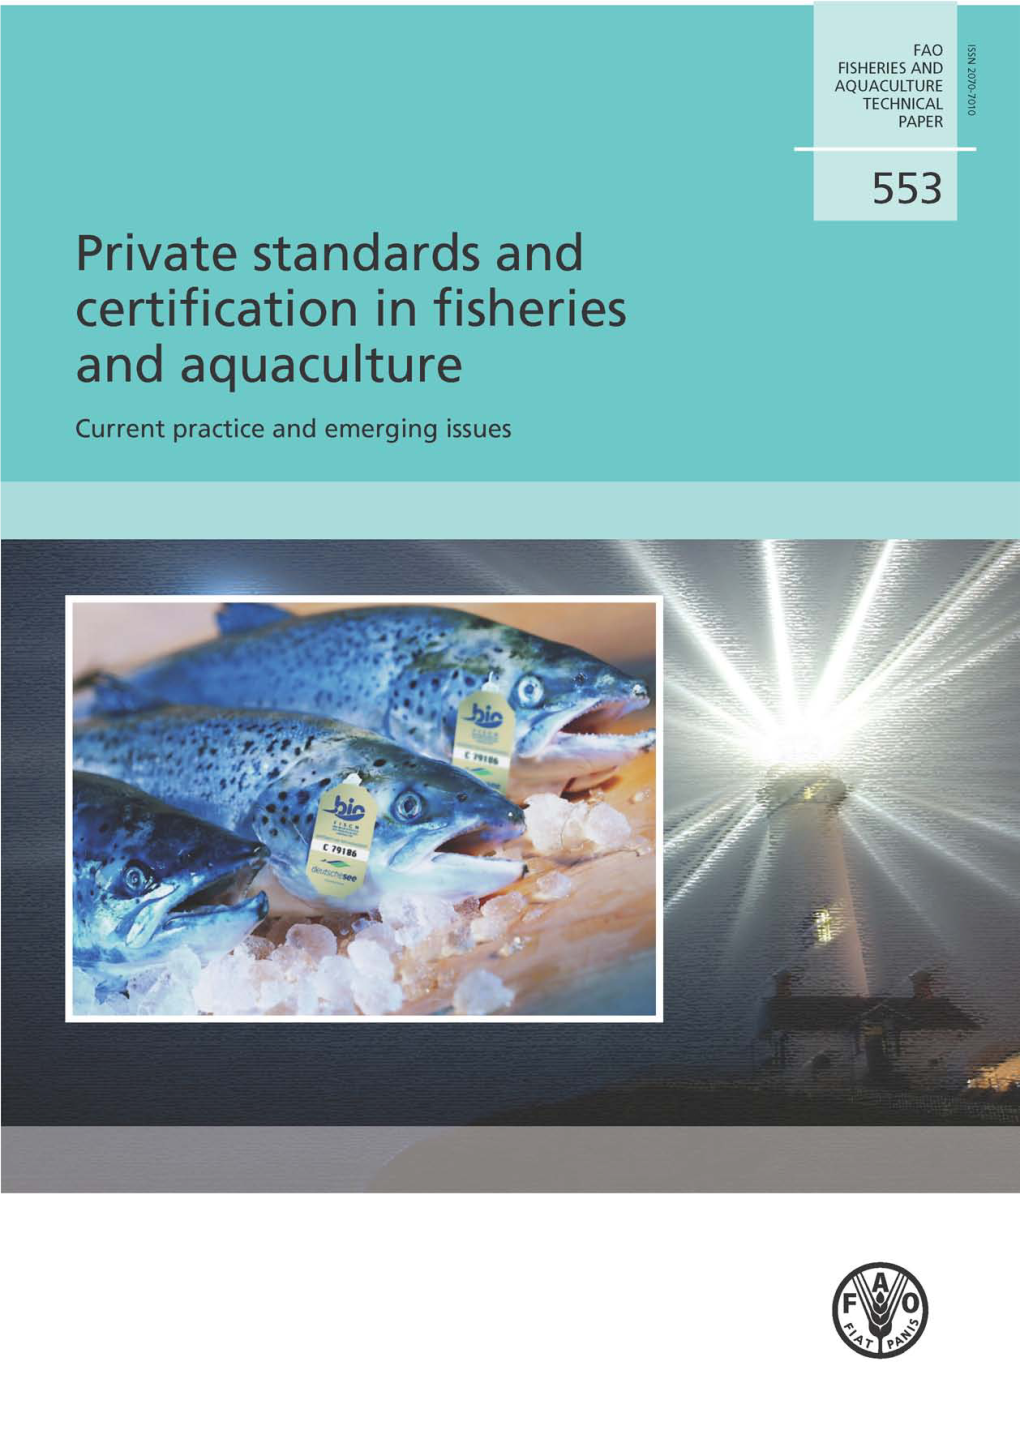 Private Standards and Certification in Fisheries and Aquaculture and Their Implications for Fish Trade from Developing Countries